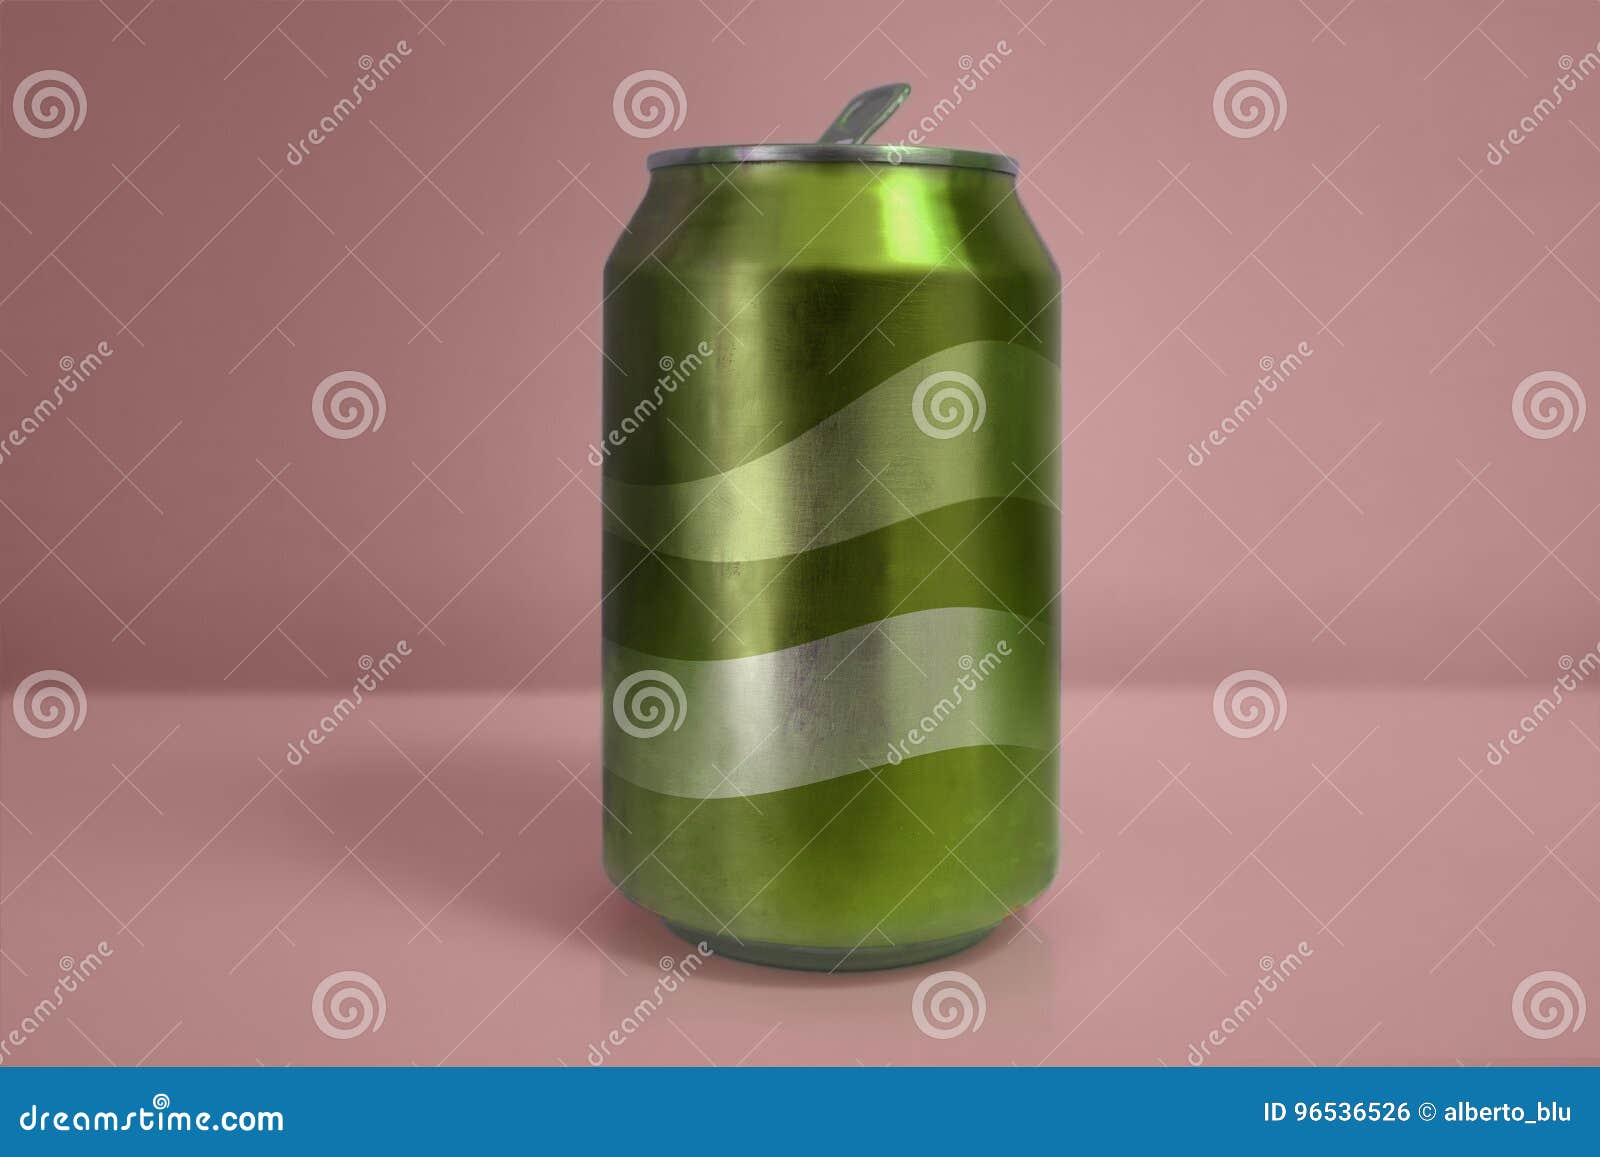 aluminum green soda can over pink background